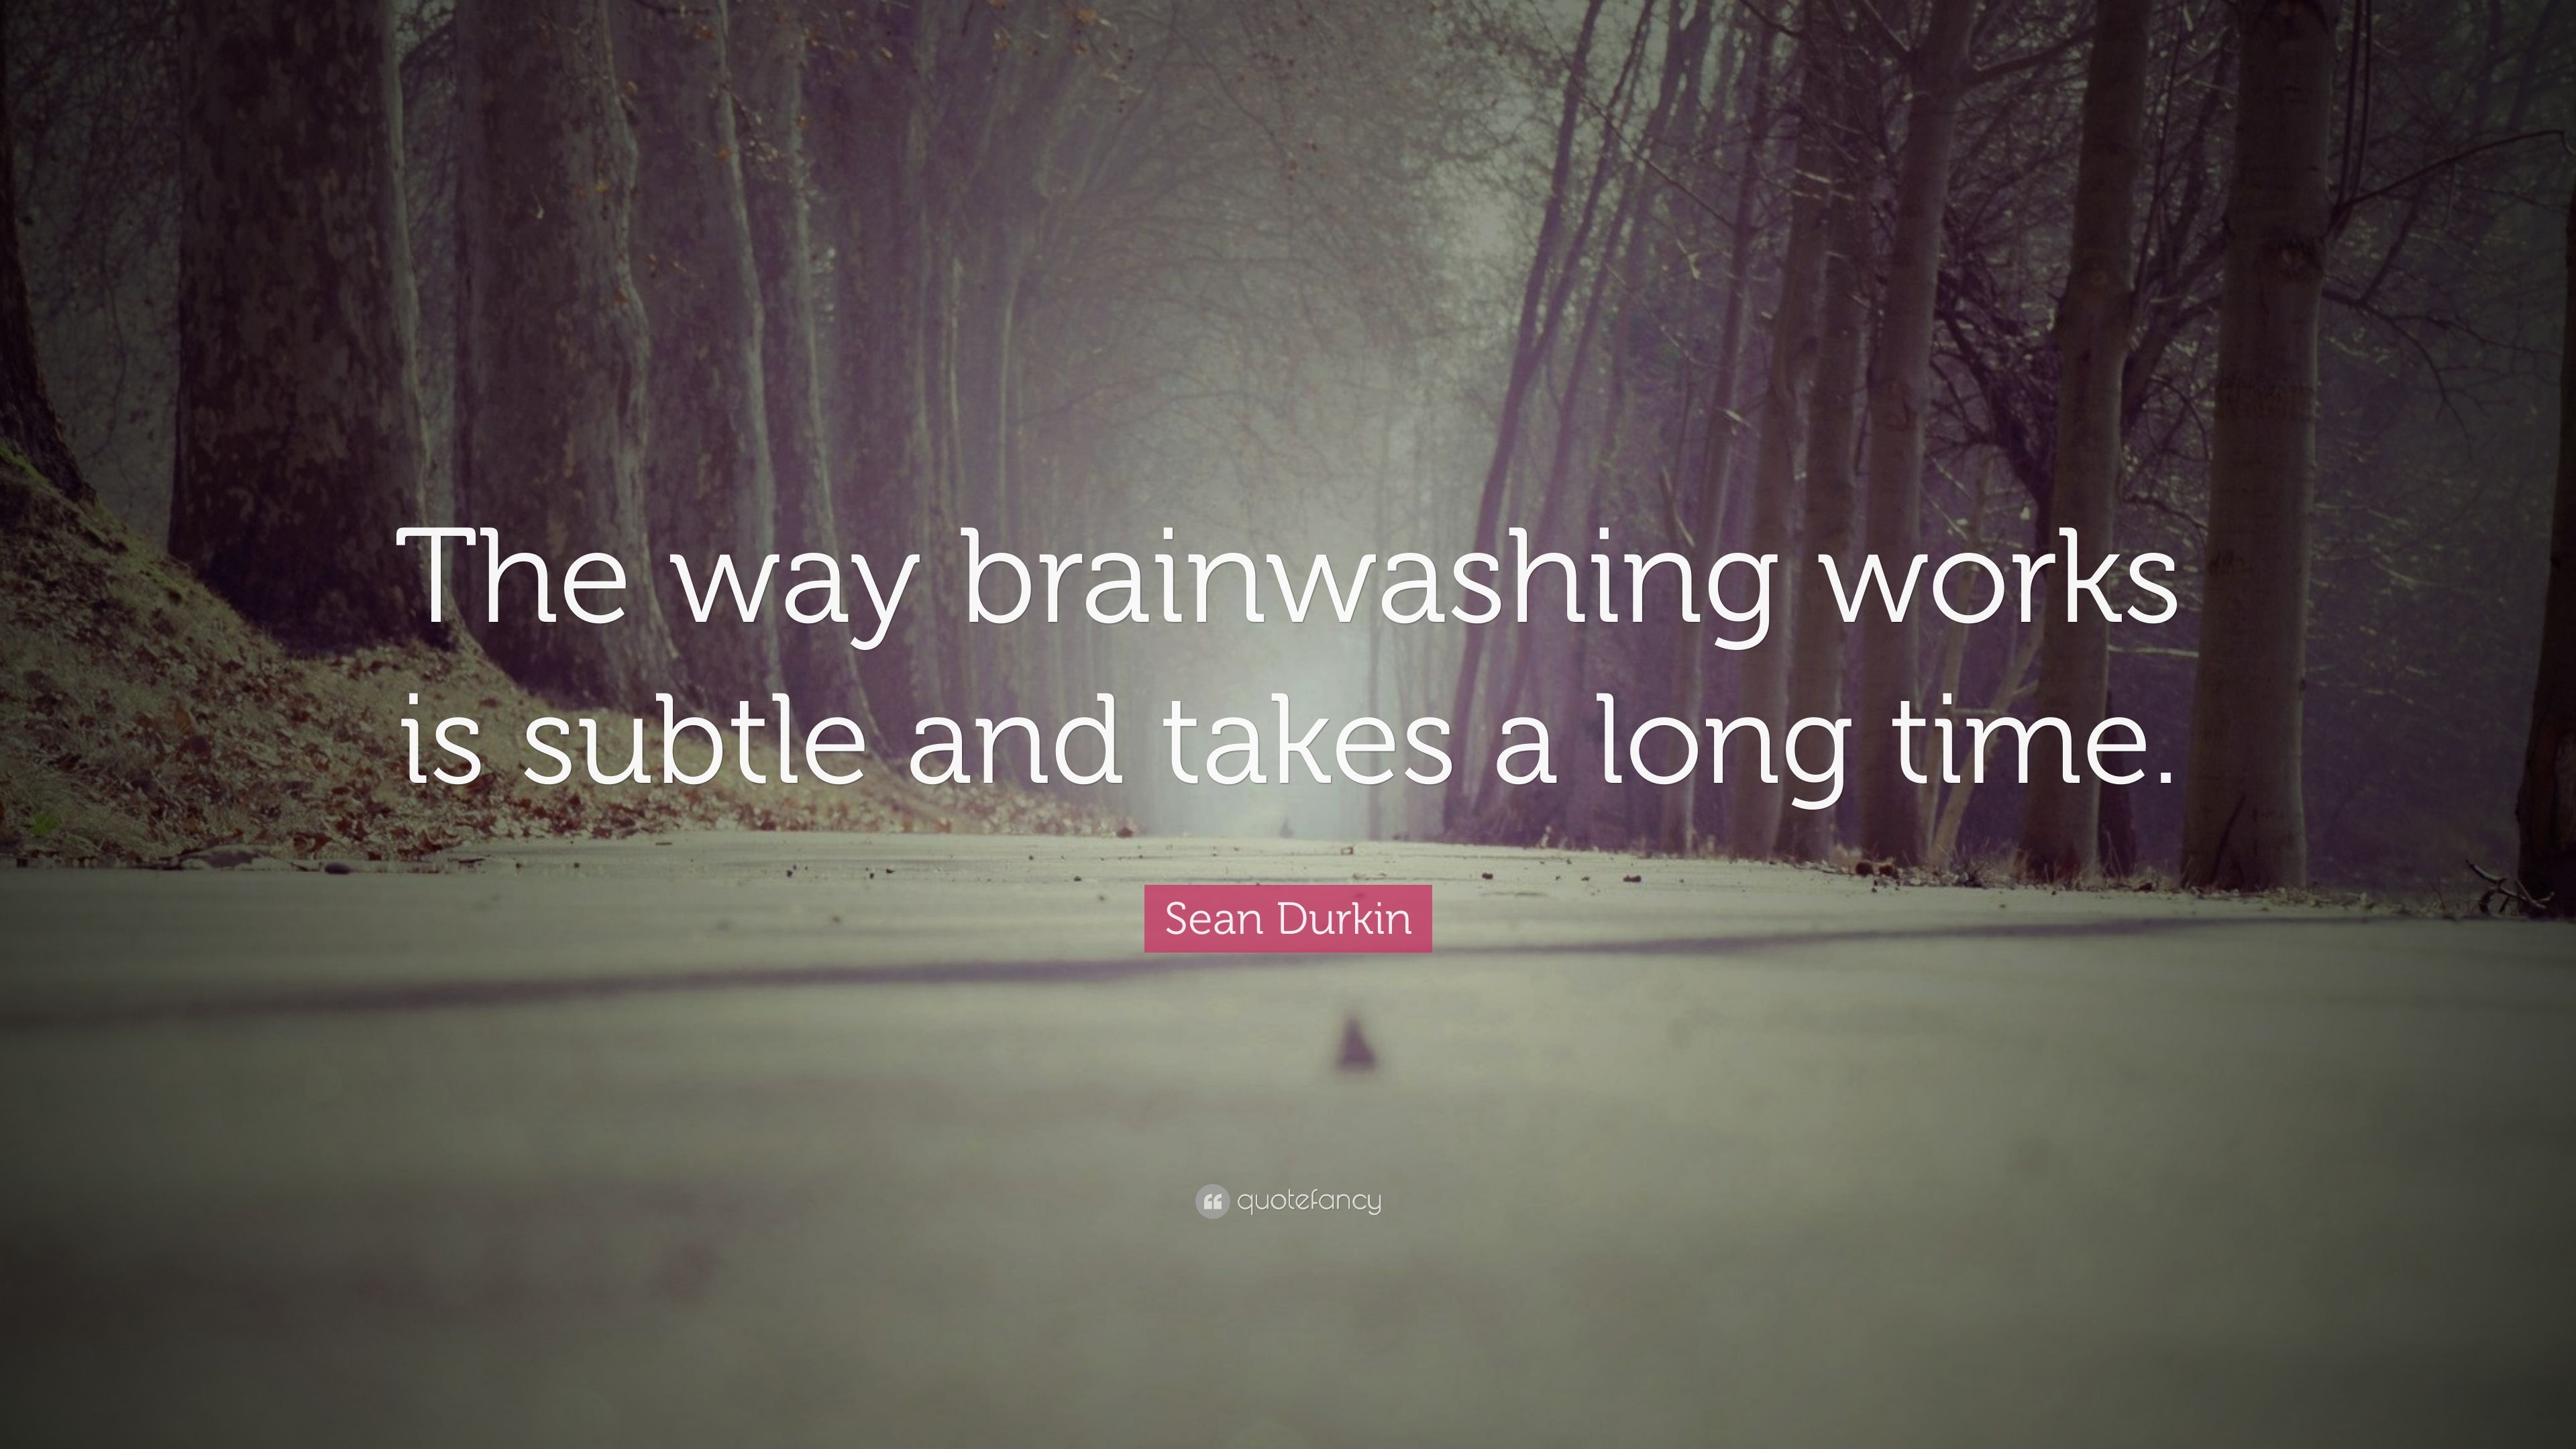 Sean Durkin Quote: "The way brainwashing works is subtle and takes a l...